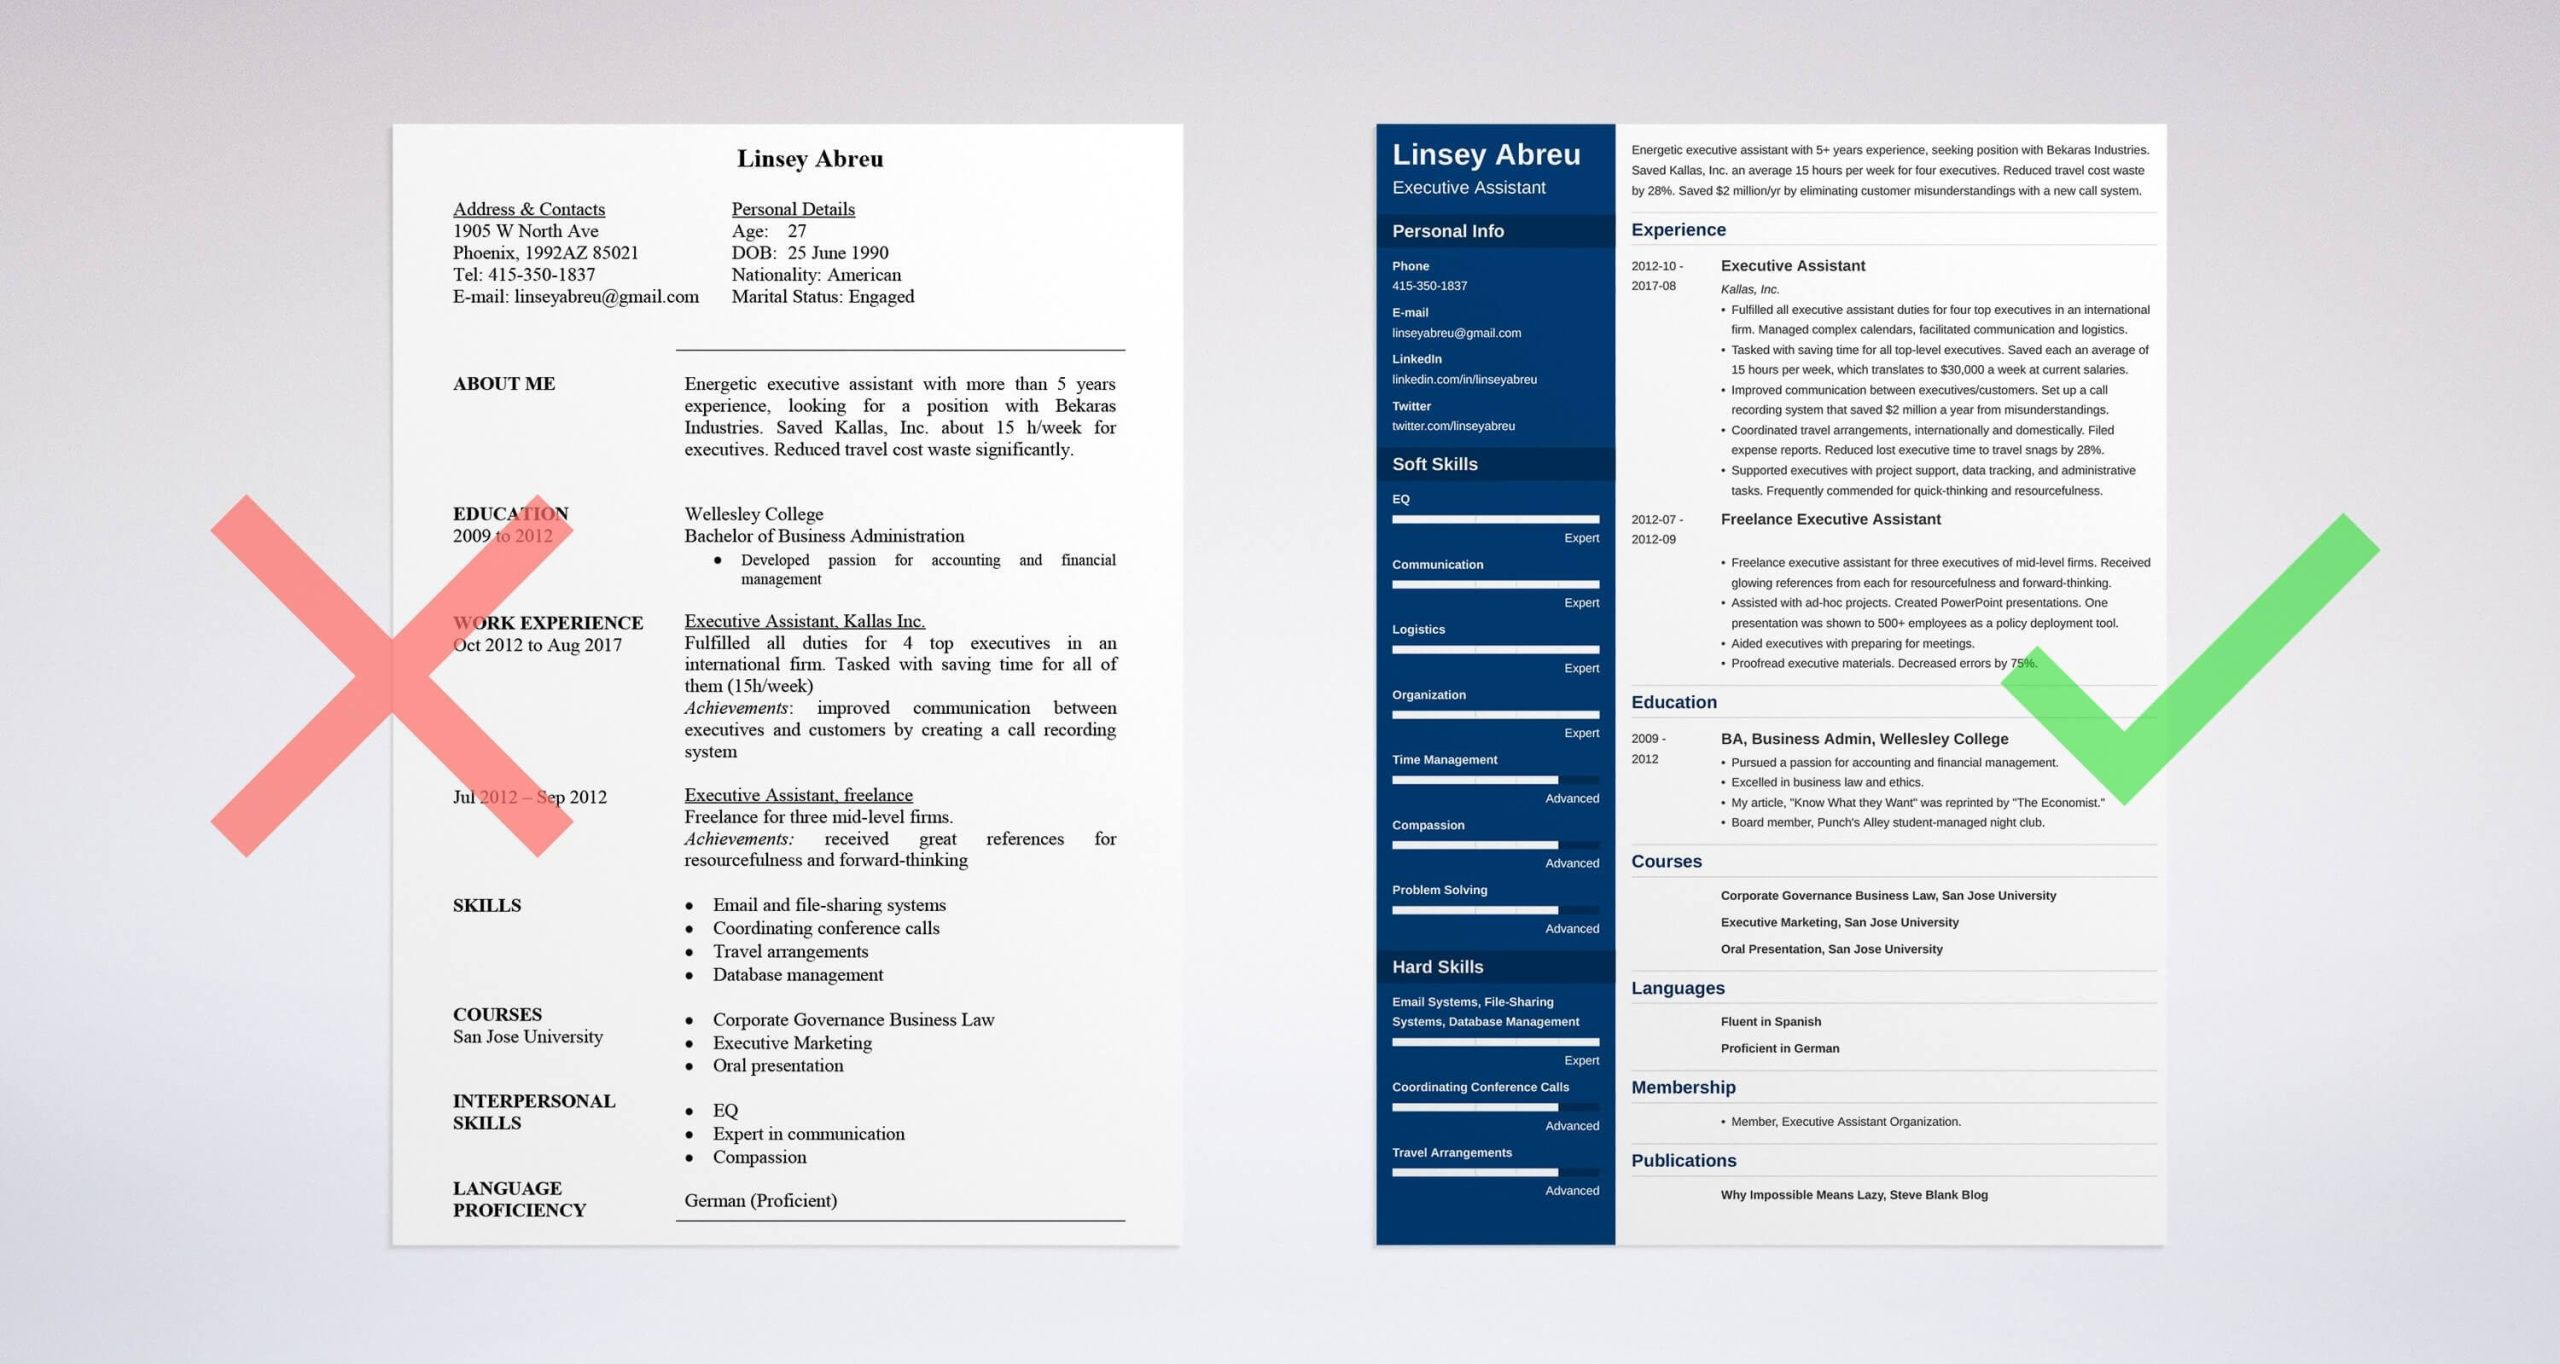 Sample Objective for Executive assistant Resume Executive assistant Resume Sample [lancarrezekiqskills & Objective]